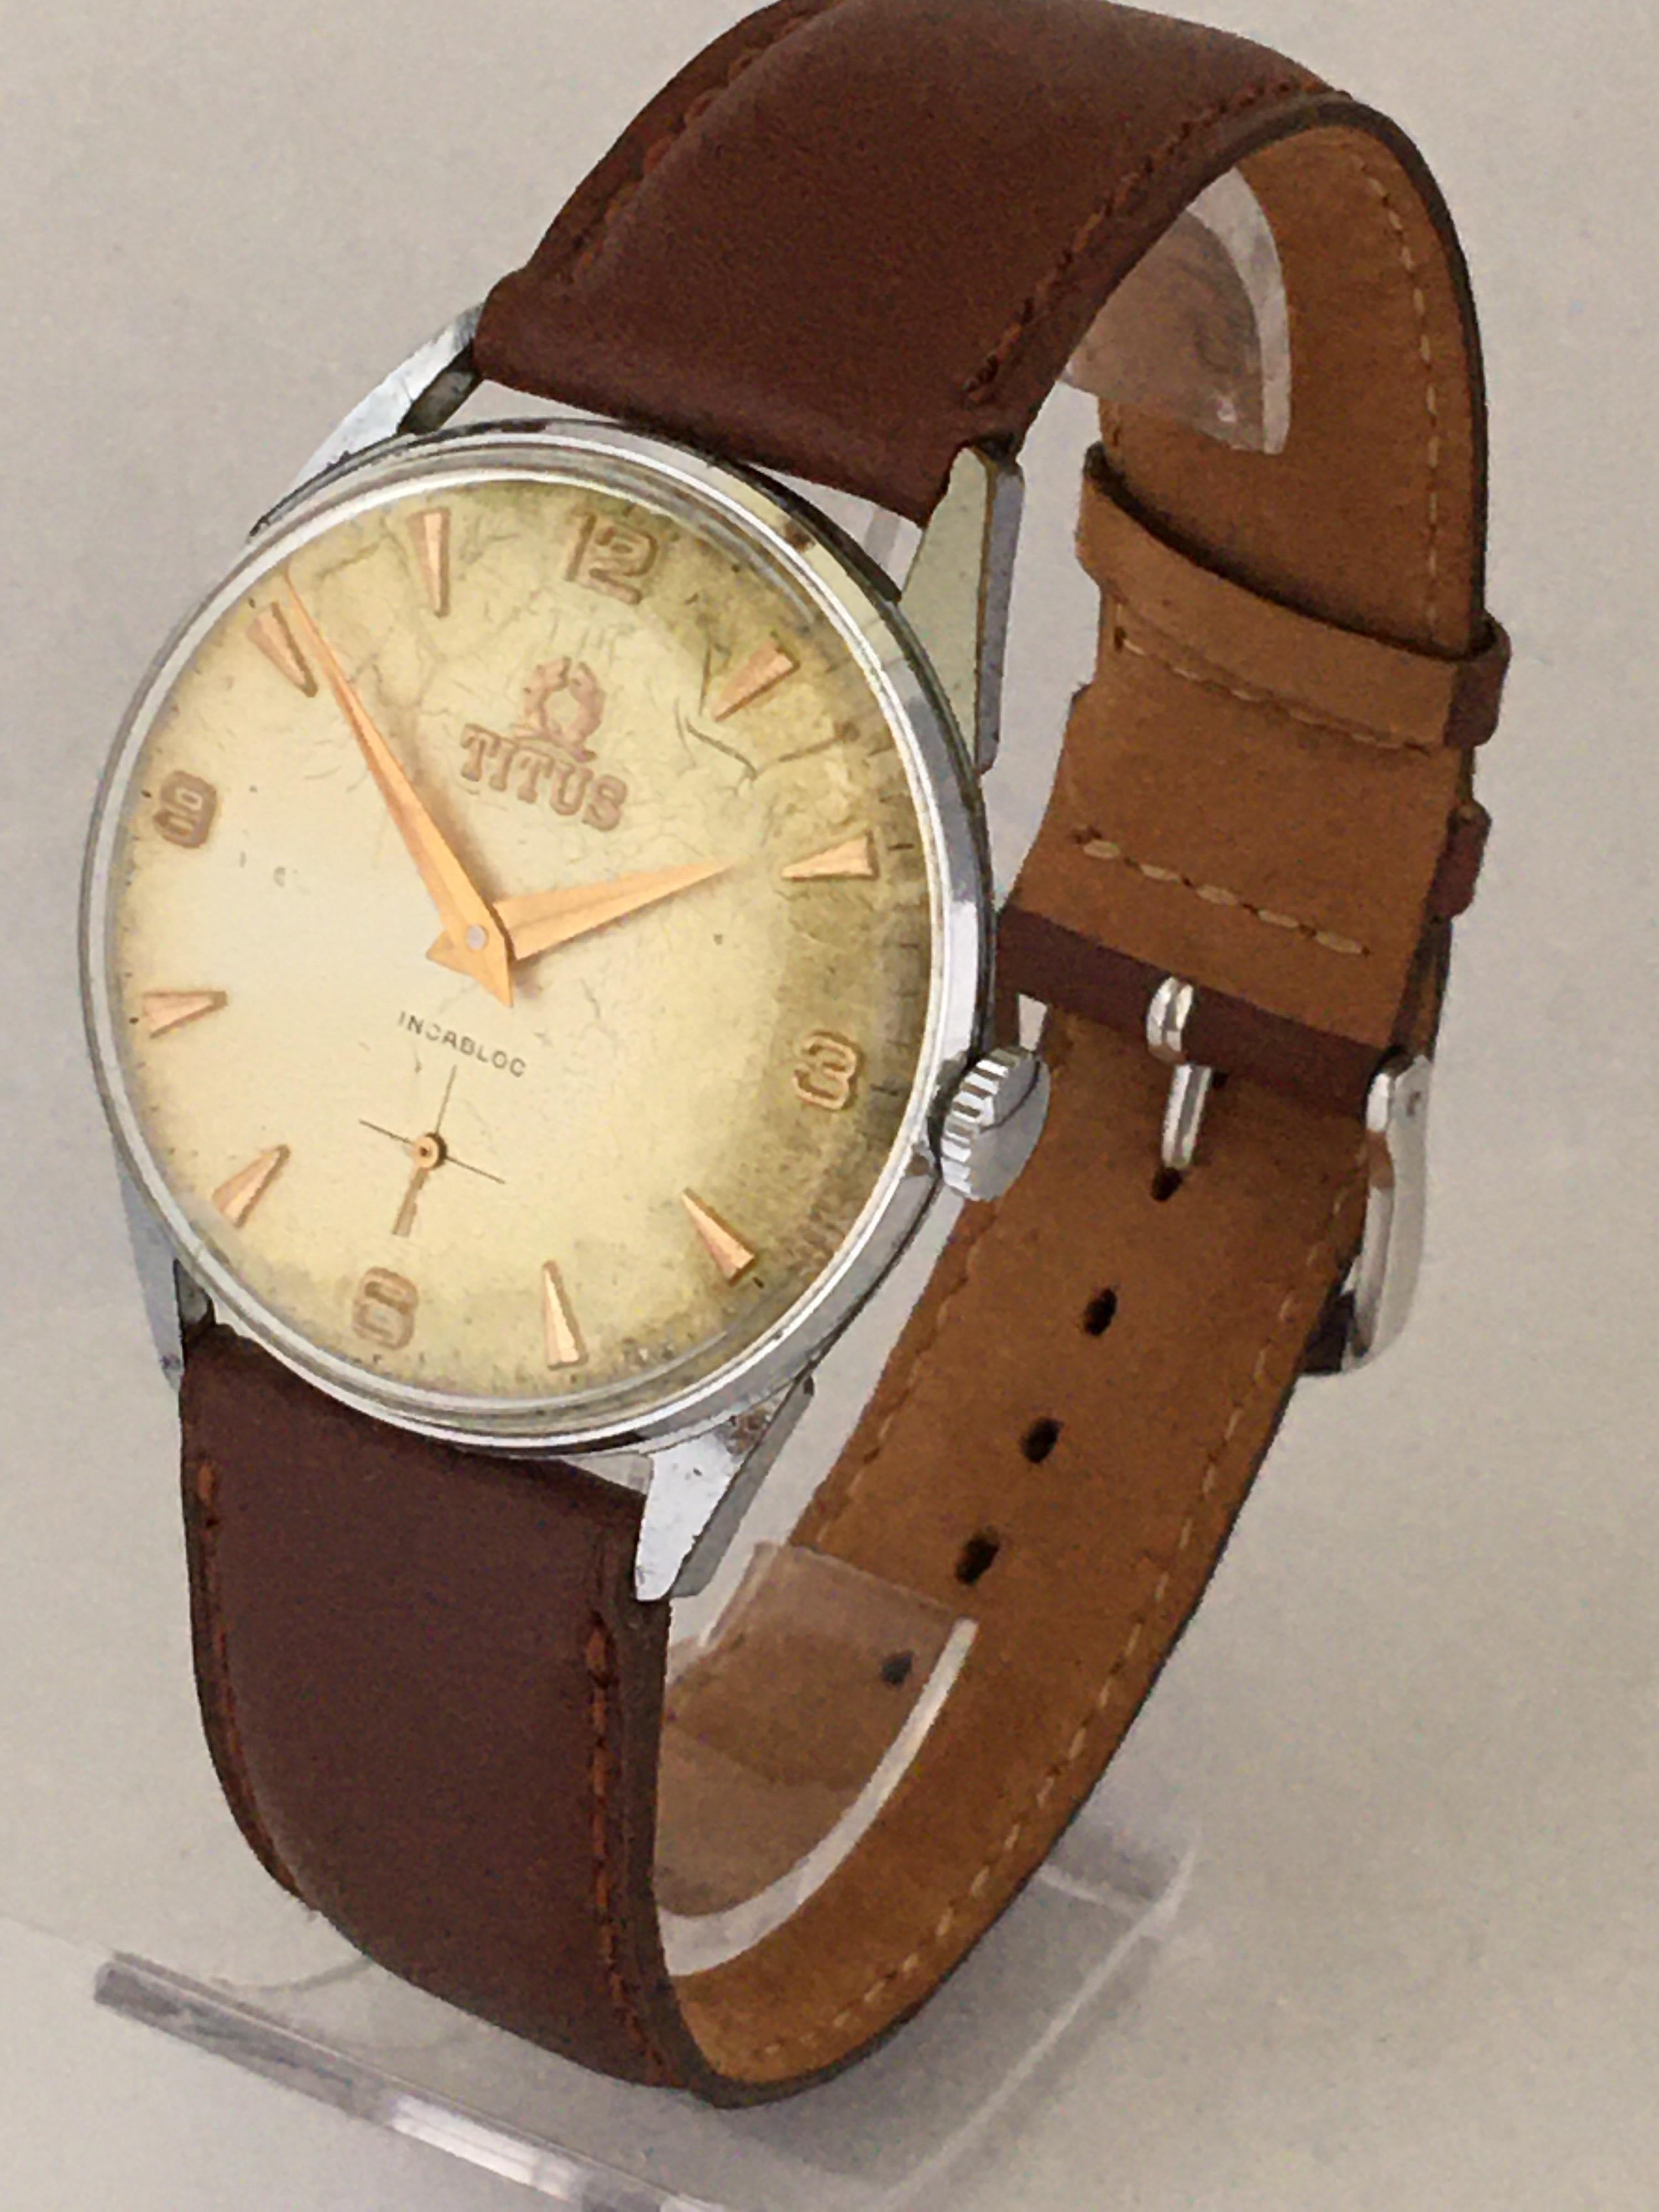 Titus Watch Vintage - For Sale on 1stDibs | titus vintage watch, vintage  titus watches prices, titus watch old model